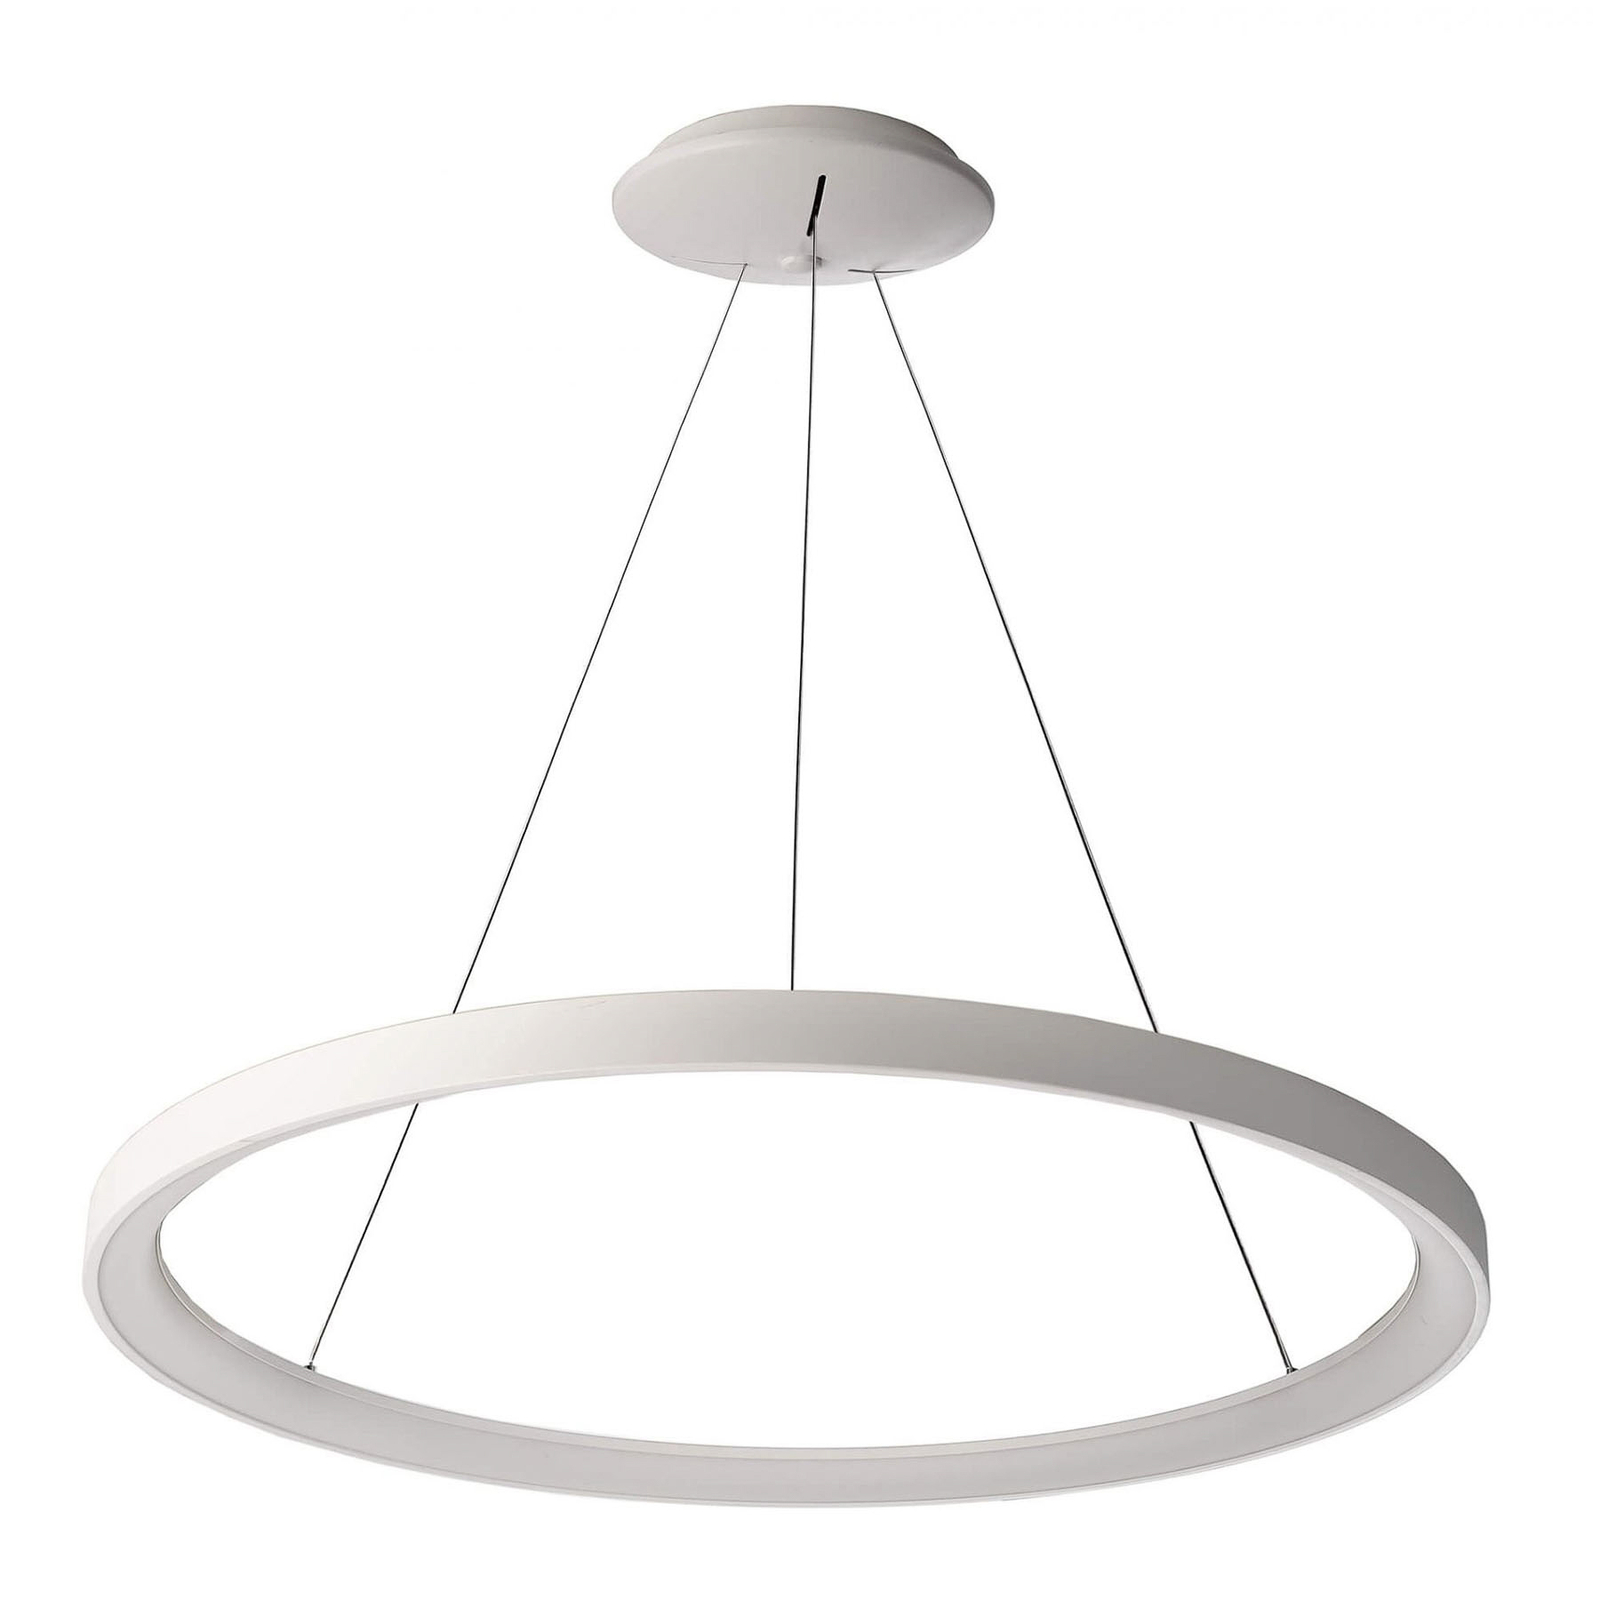 Suspension LED Merope, Ø 78 cm, dimmable, blanche